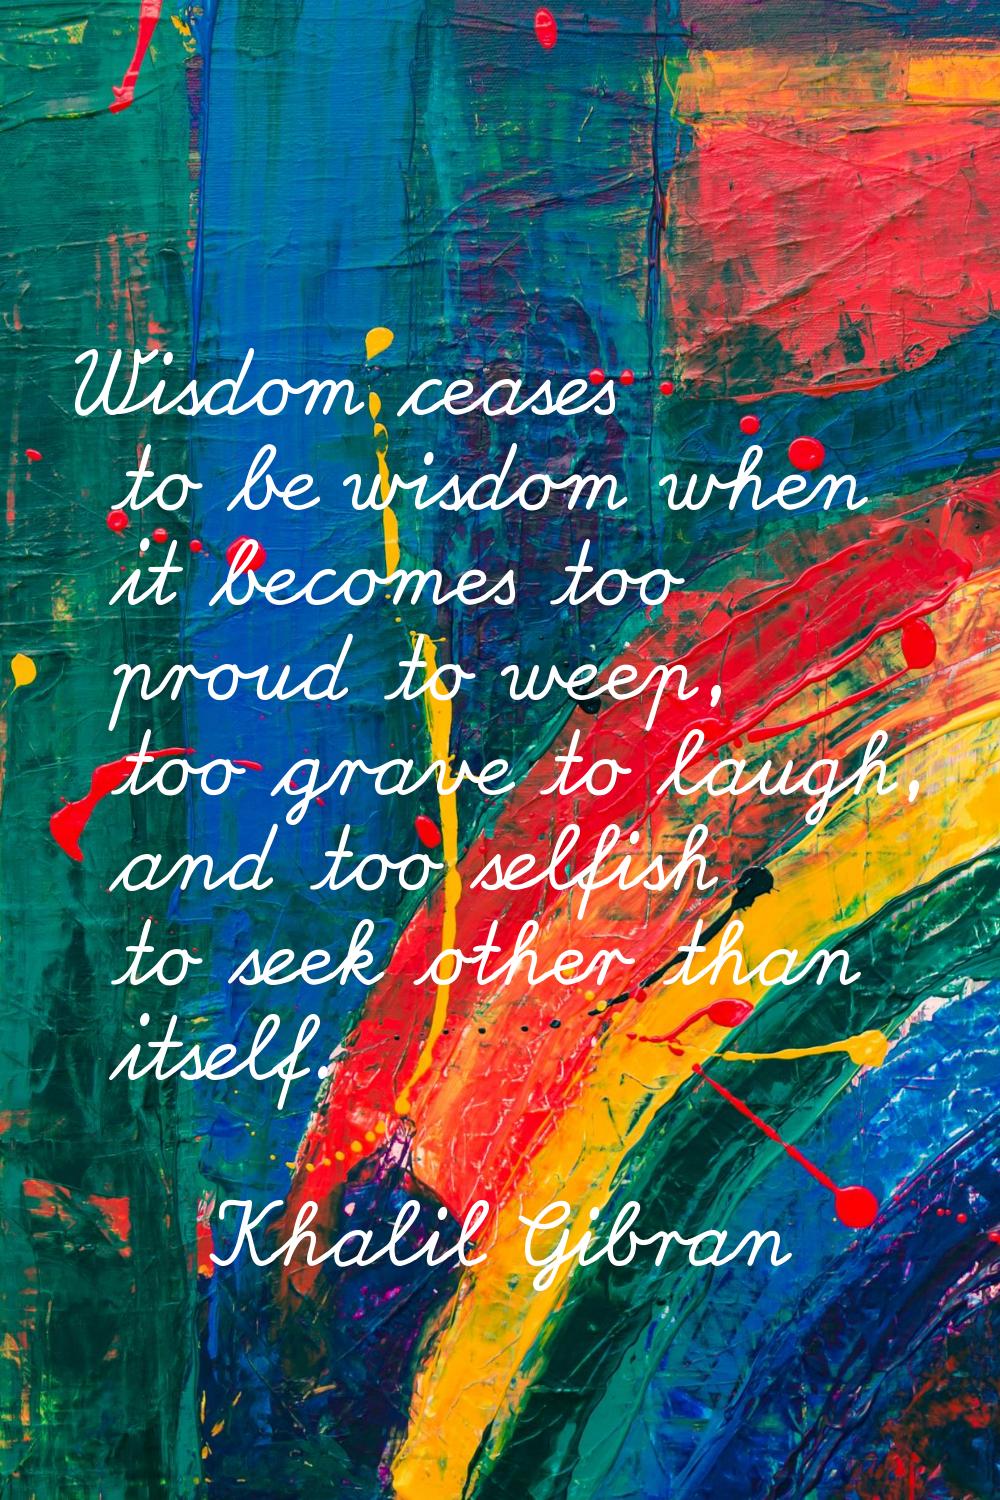 Wisdom ceases to be wisdom when it becomes too proud to weep, too grave to laugh, and too selfish t